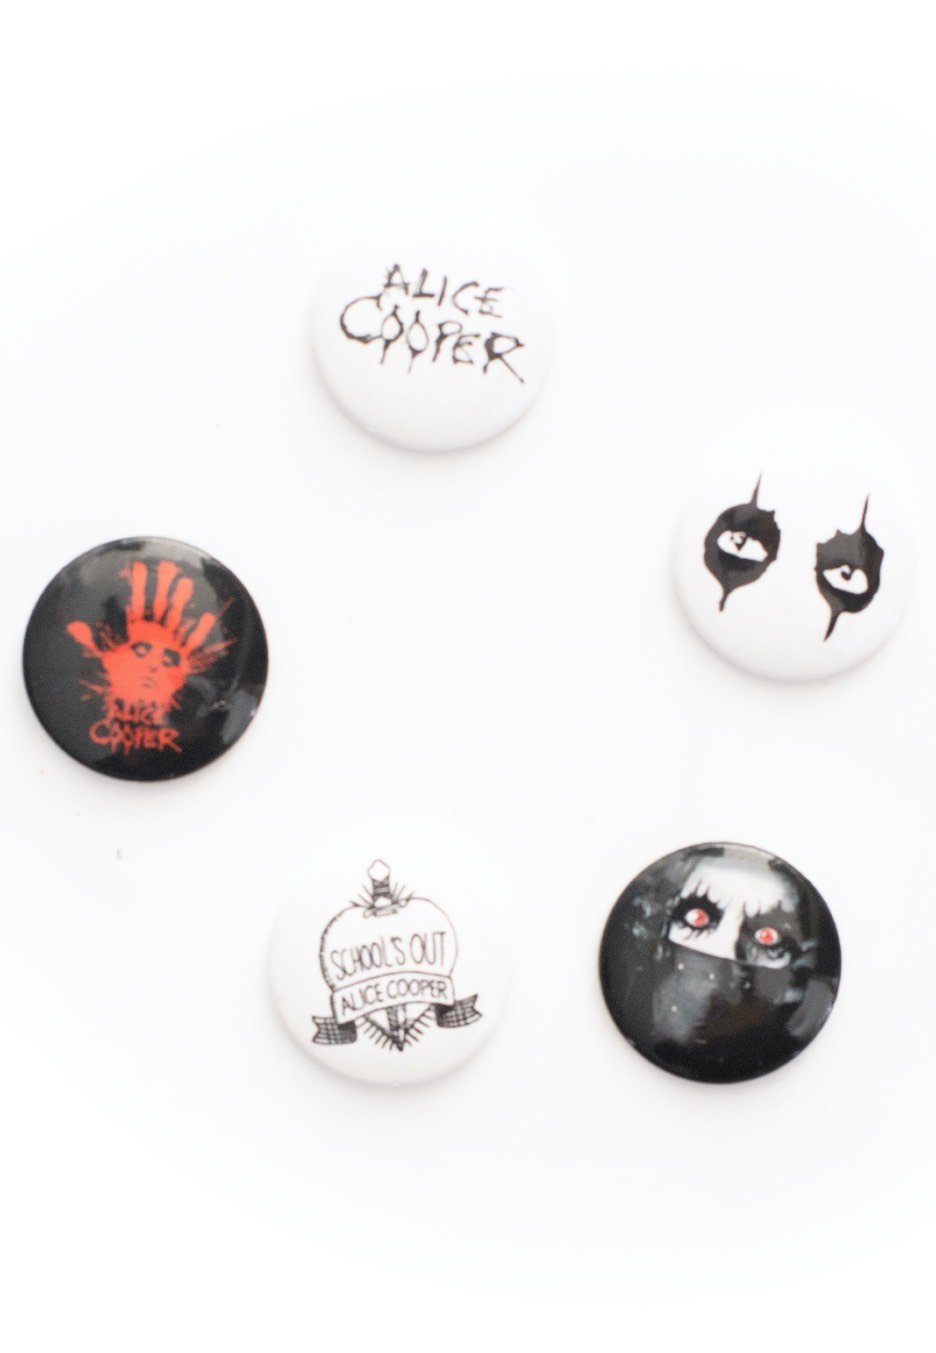 Alice Cooper - Eyes Pack Of 5 - Button Set